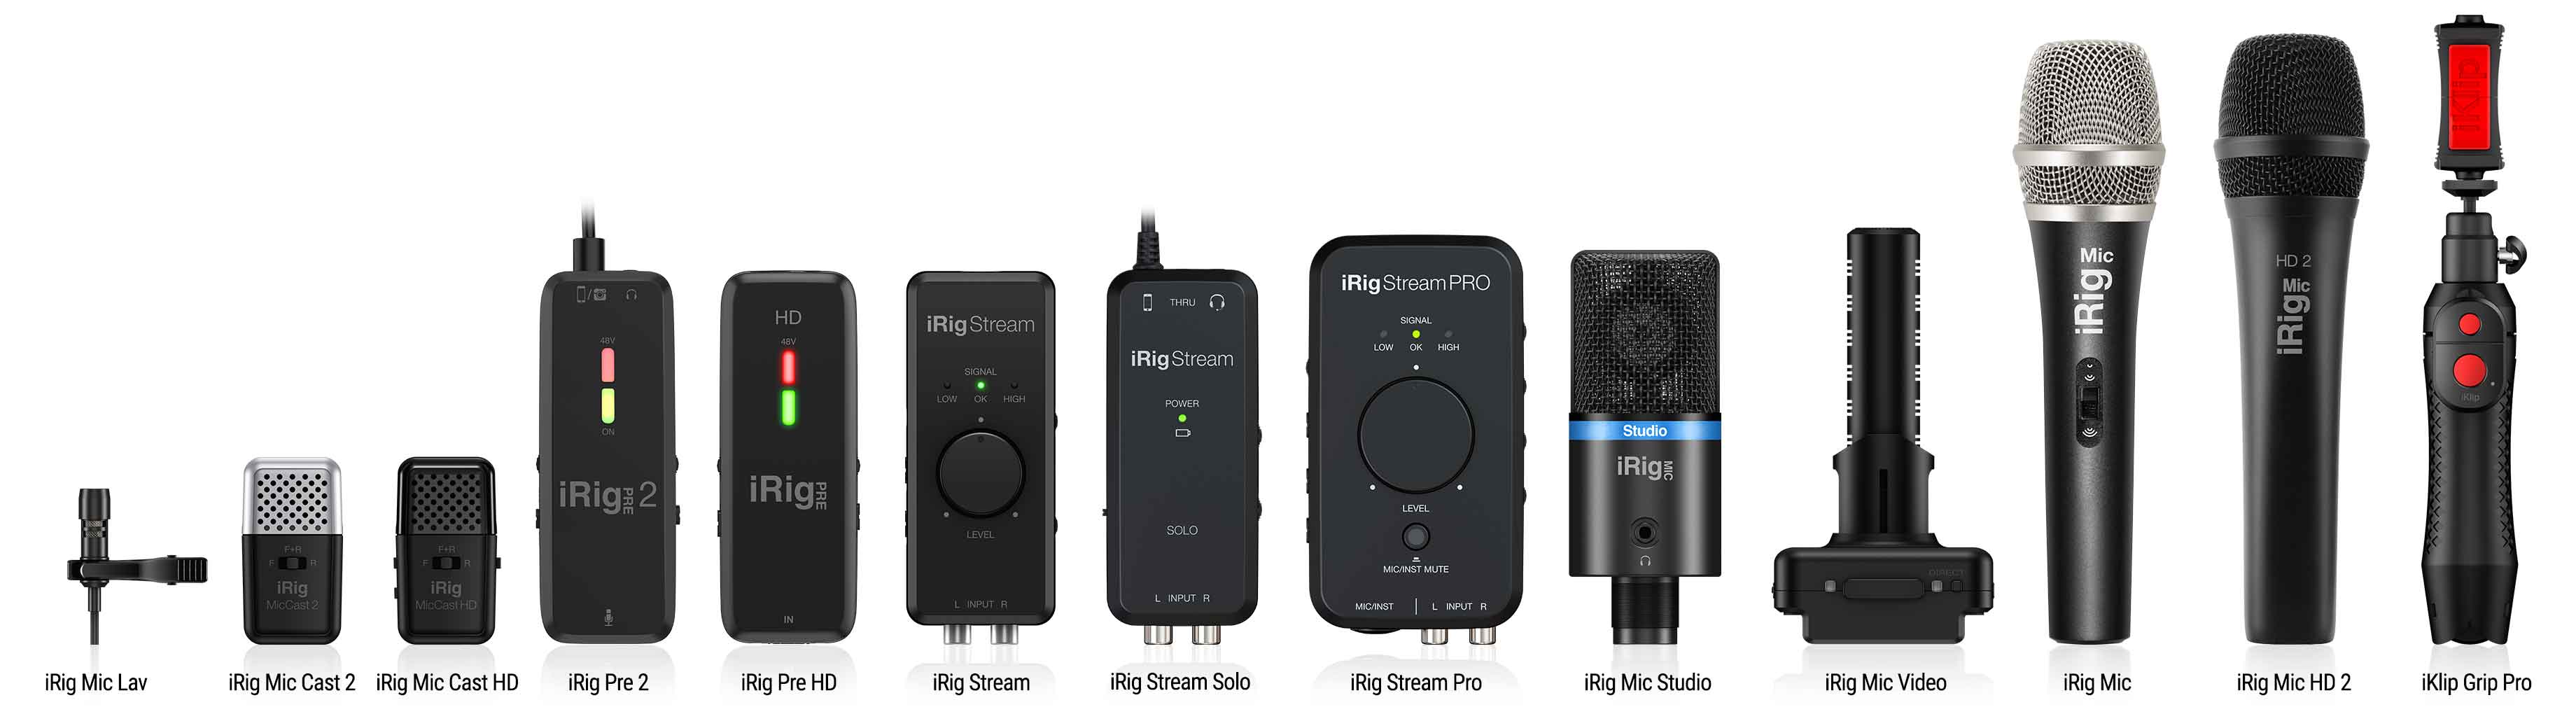 iRig Pre 2 mobile microphone interface for smartphones and DSLR